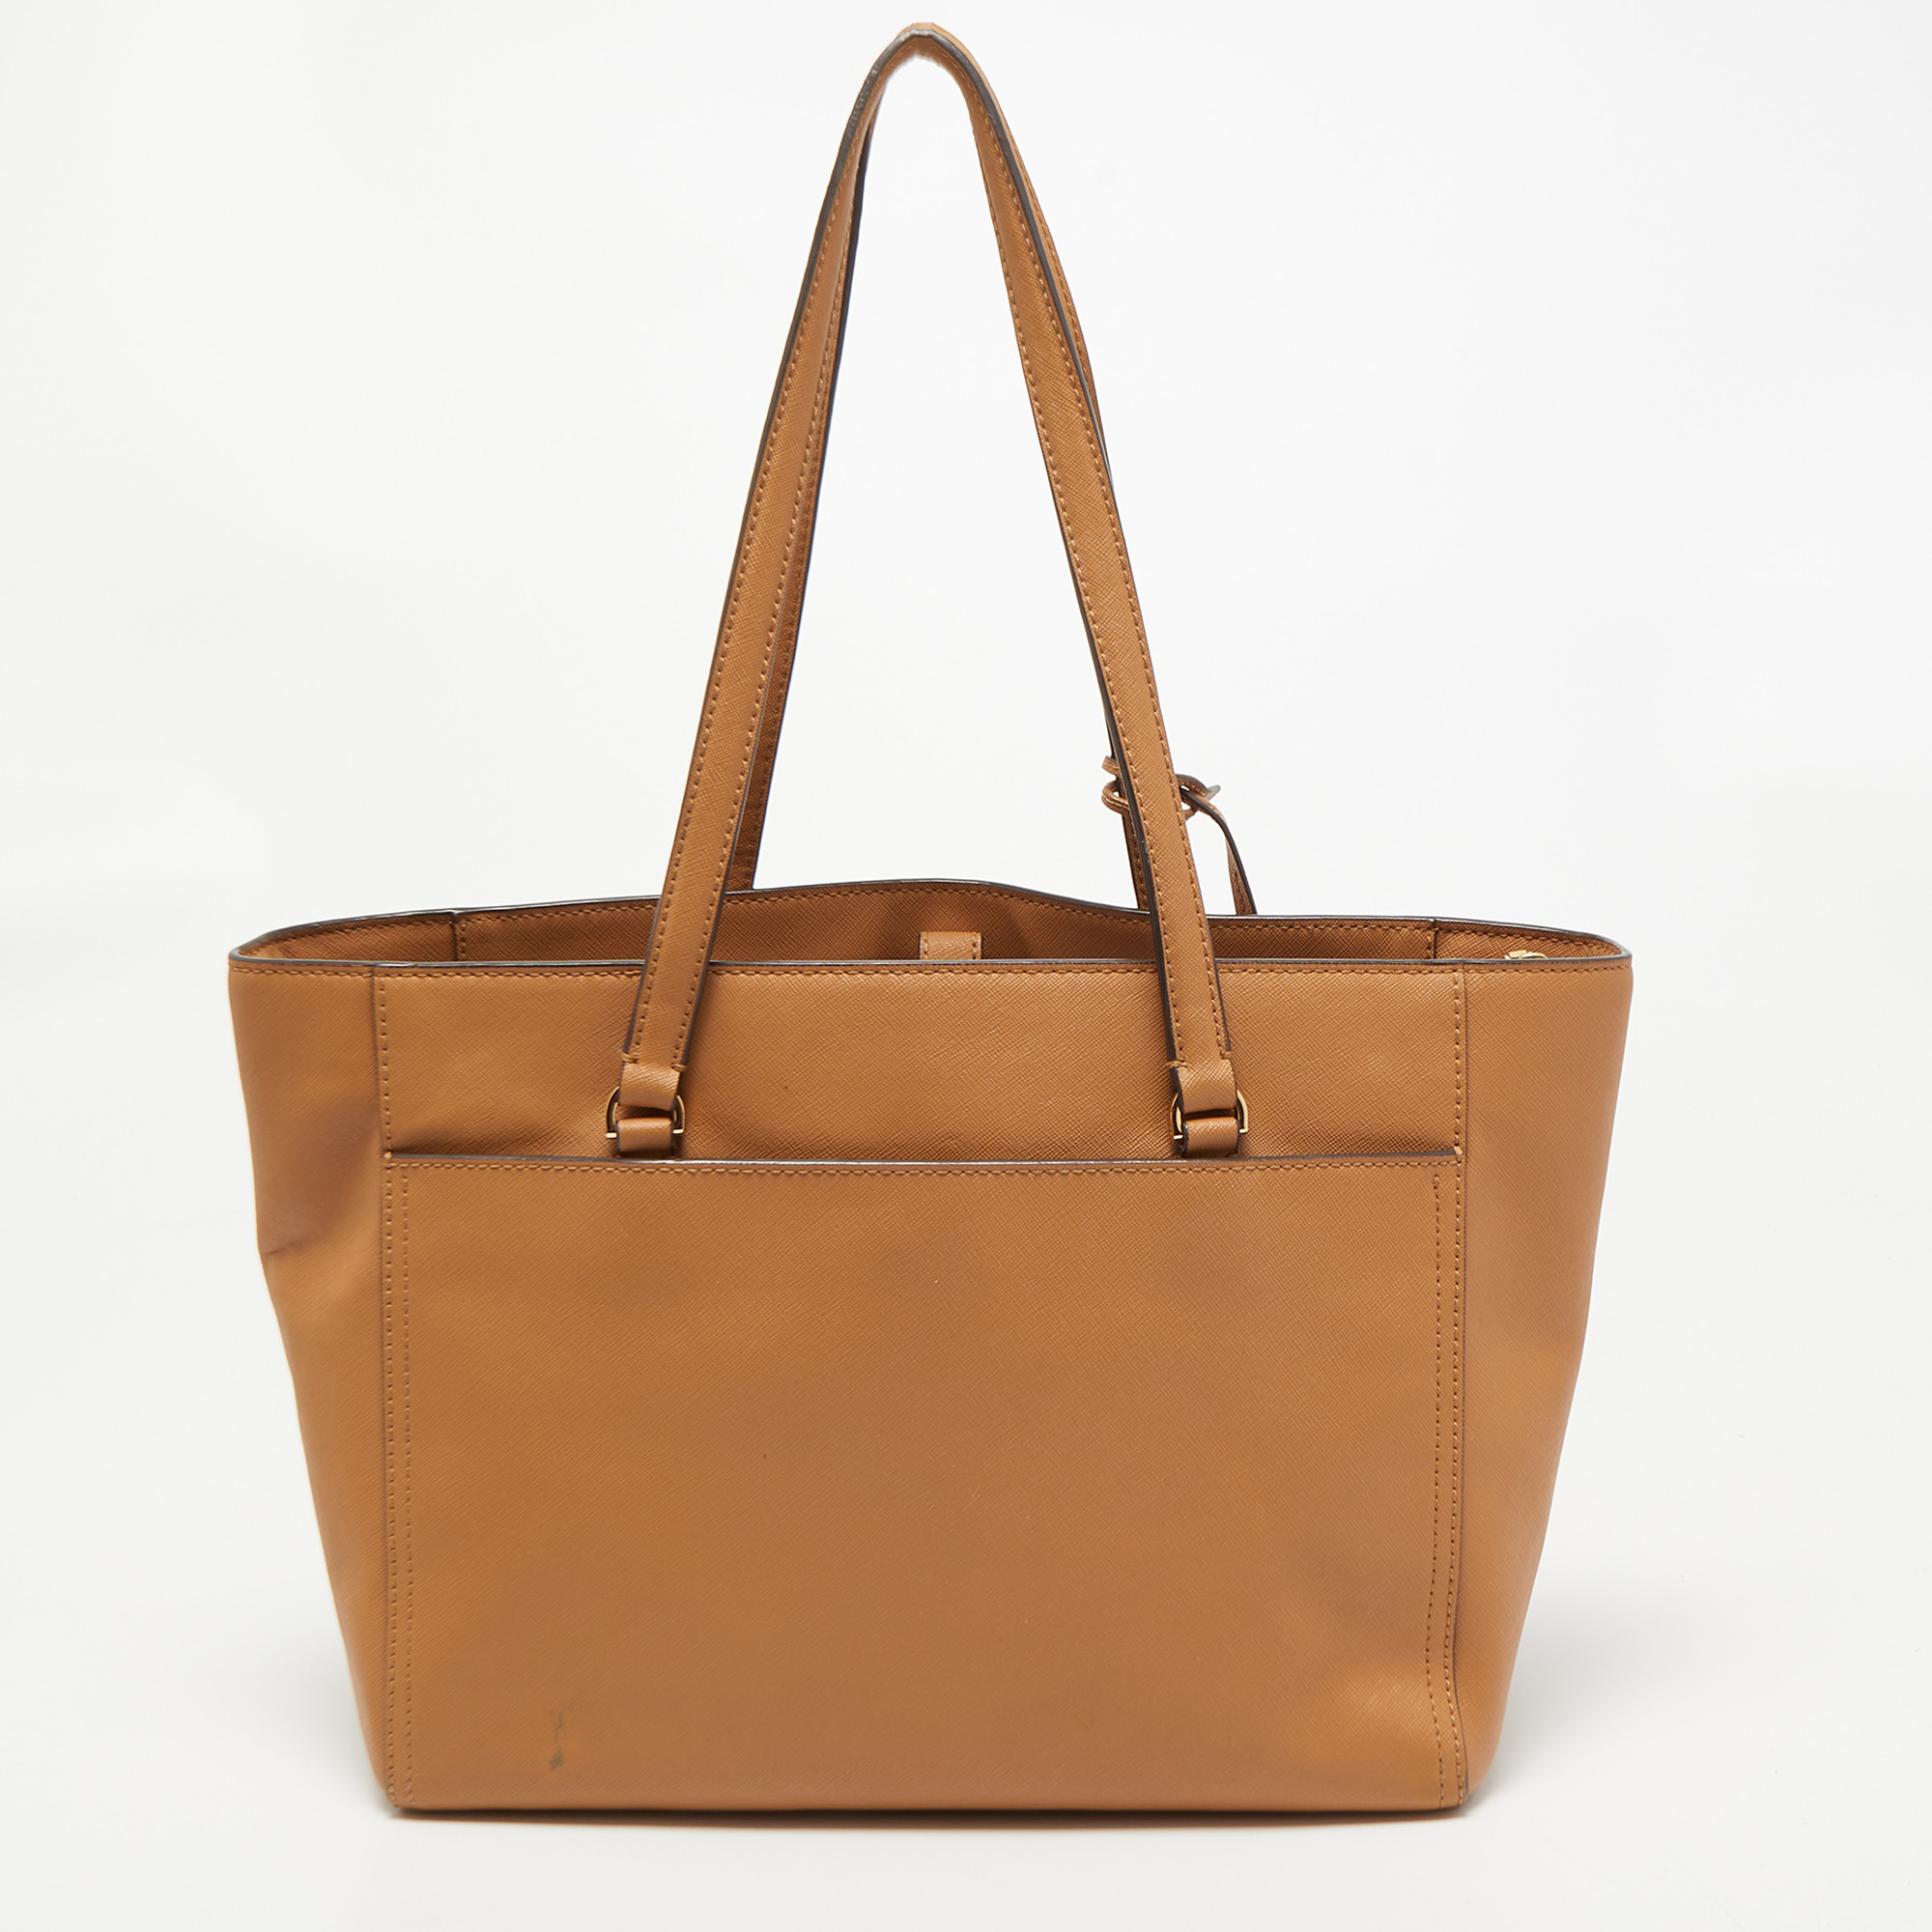 Tory Burch Tan Leather Parker Tote